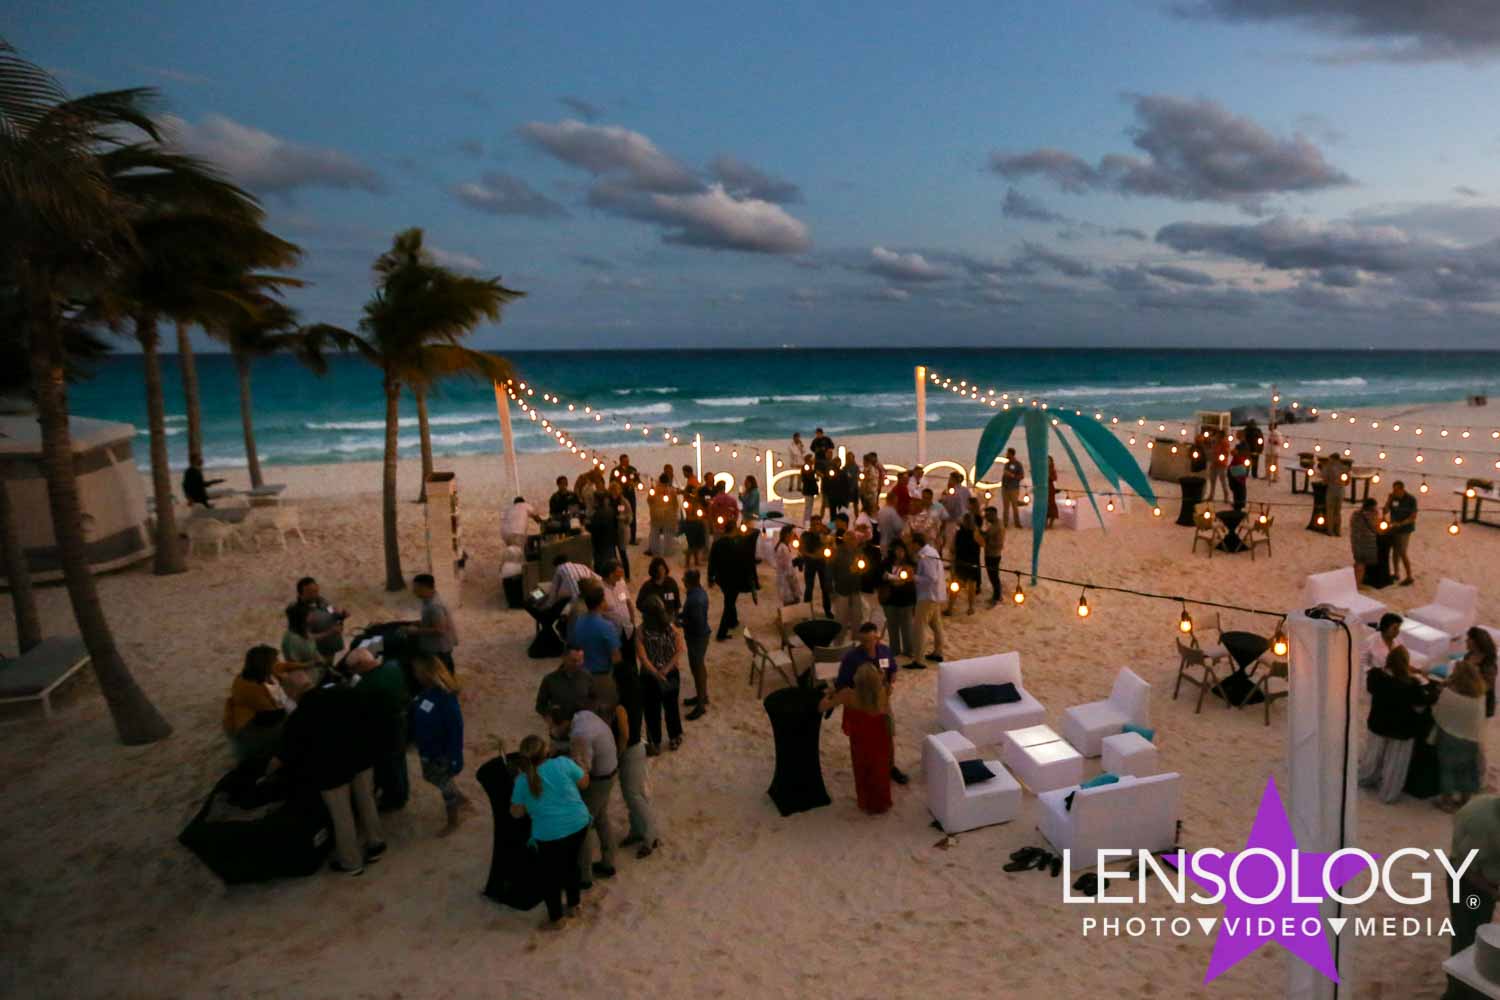 LENSOLOGY.NET - 2021 Evoqua Presidents Council, Cancun, Mexico.All images are copyright of Lensology.netEmail: info@lensology.netwww.lensology.net